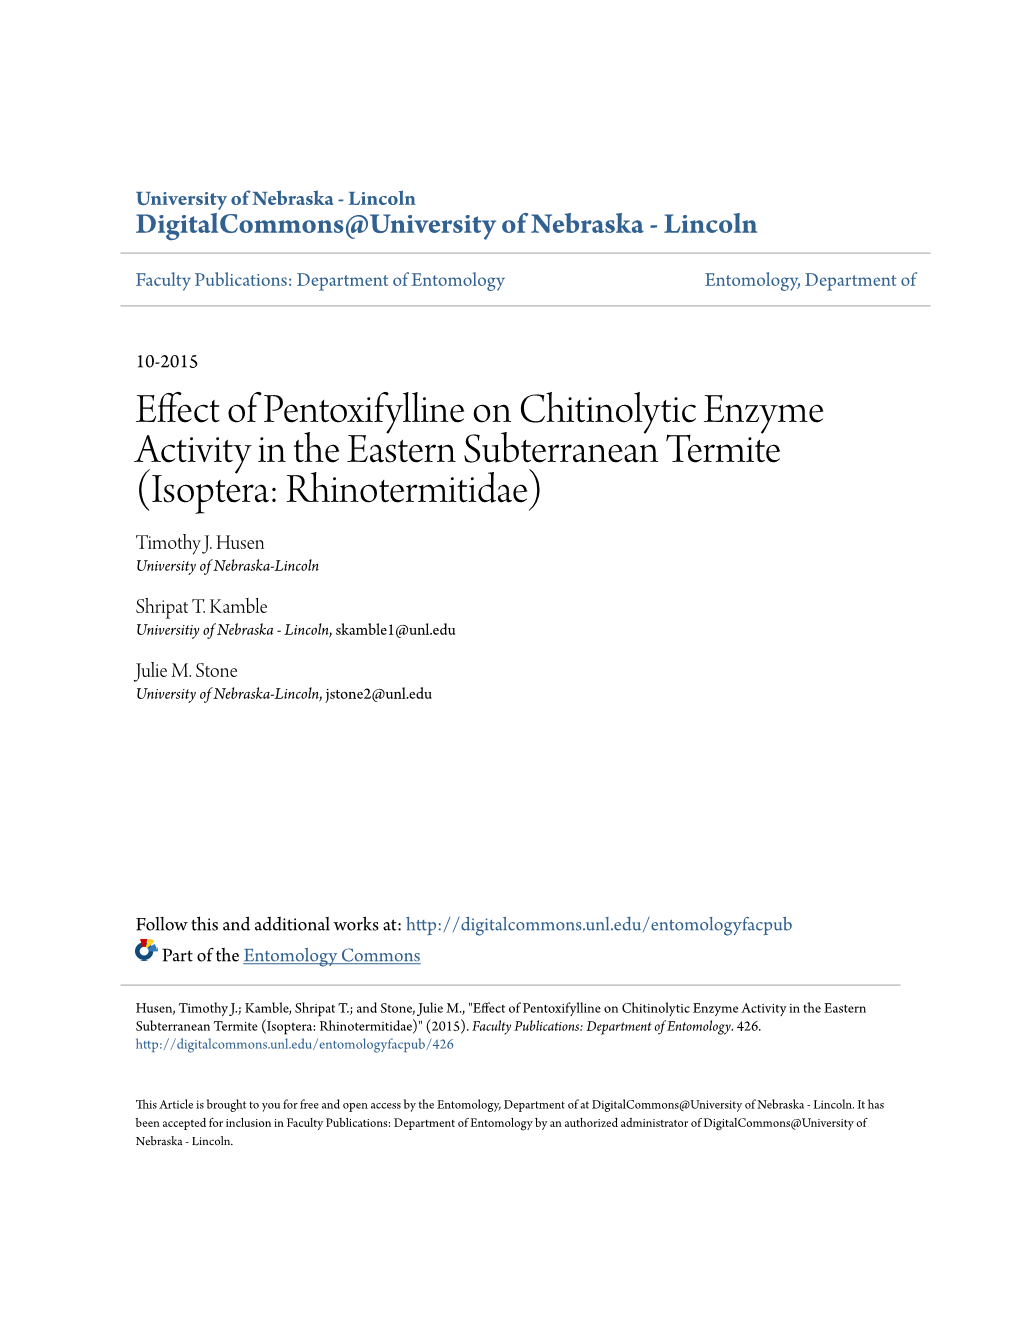 Effect of Pentoxifylline on Chitinolytic Enzyme Activity in the Eastern Subterranean Termite (Isoptera: Rhinotermitidae) Timothy J